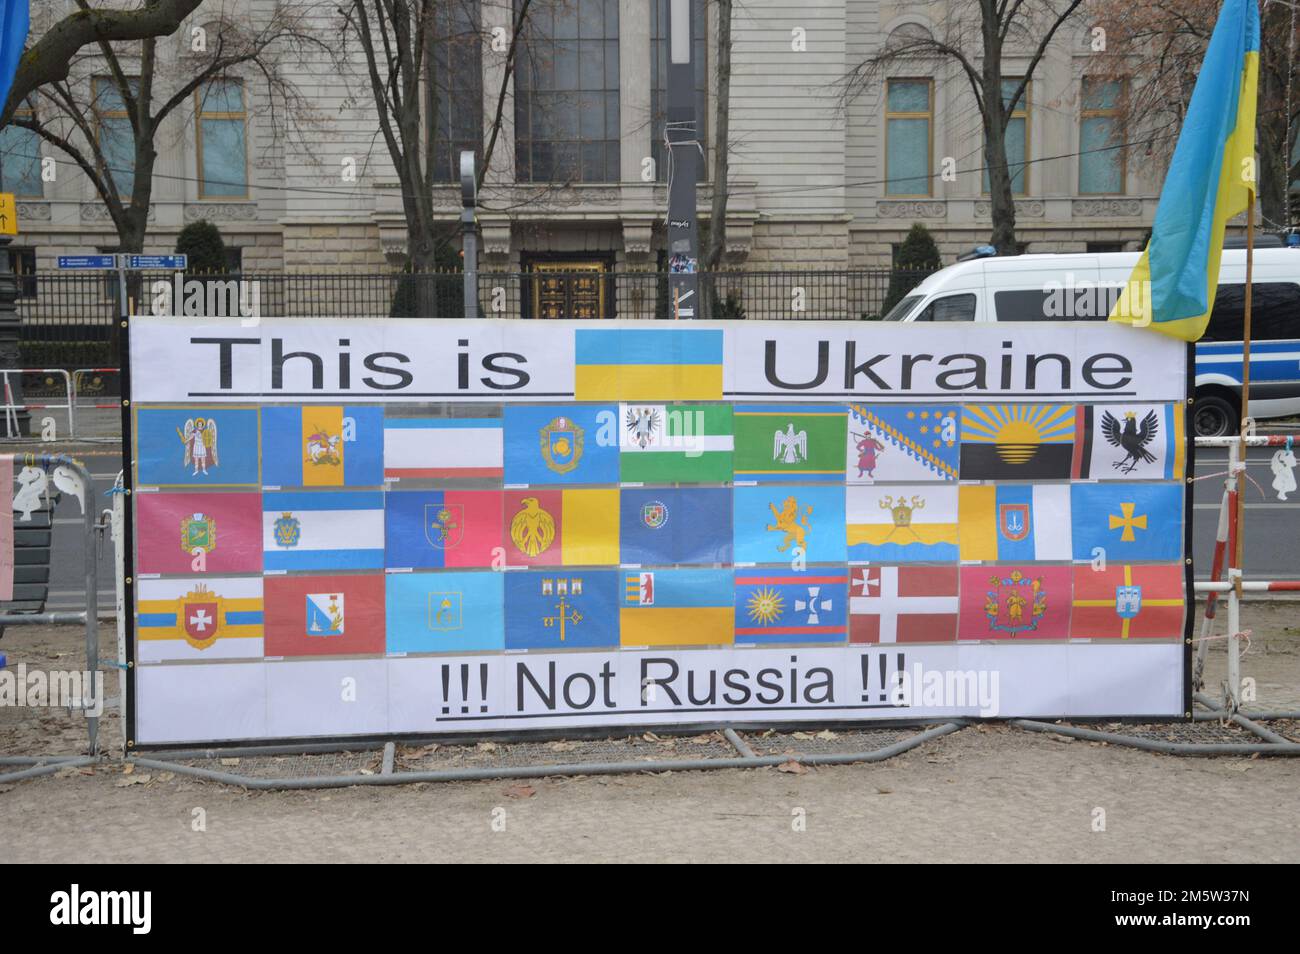 Berlin, Germany - December 17, 2022 - Protests in front of the Russian Embassy at Unter den Linden against the 2022 Russian invasion of Ukraine. (Photo by Markku Rainer Peltonen) Stock Photo